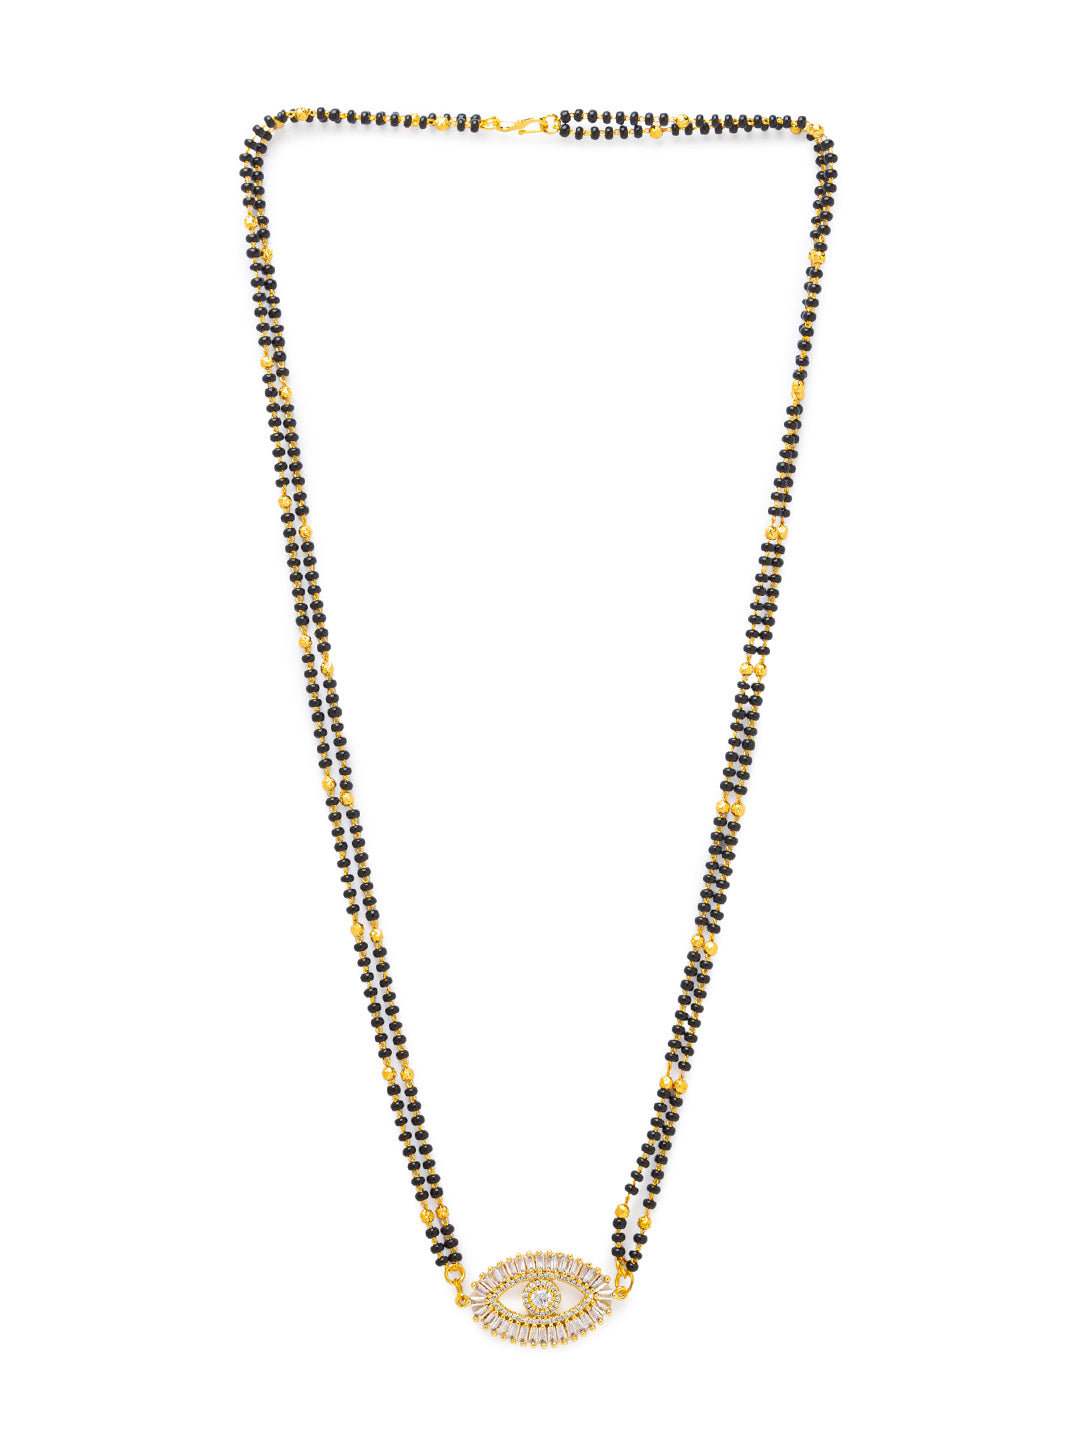 Digital Dress Room Digital Dress Room Diamond Gold Plated Long Mangalsutra मंगलसूत्र Latest Design/Cz Solitaire/Black Beads Chain New Mangalsutra Designs For Women (24 Inches) 